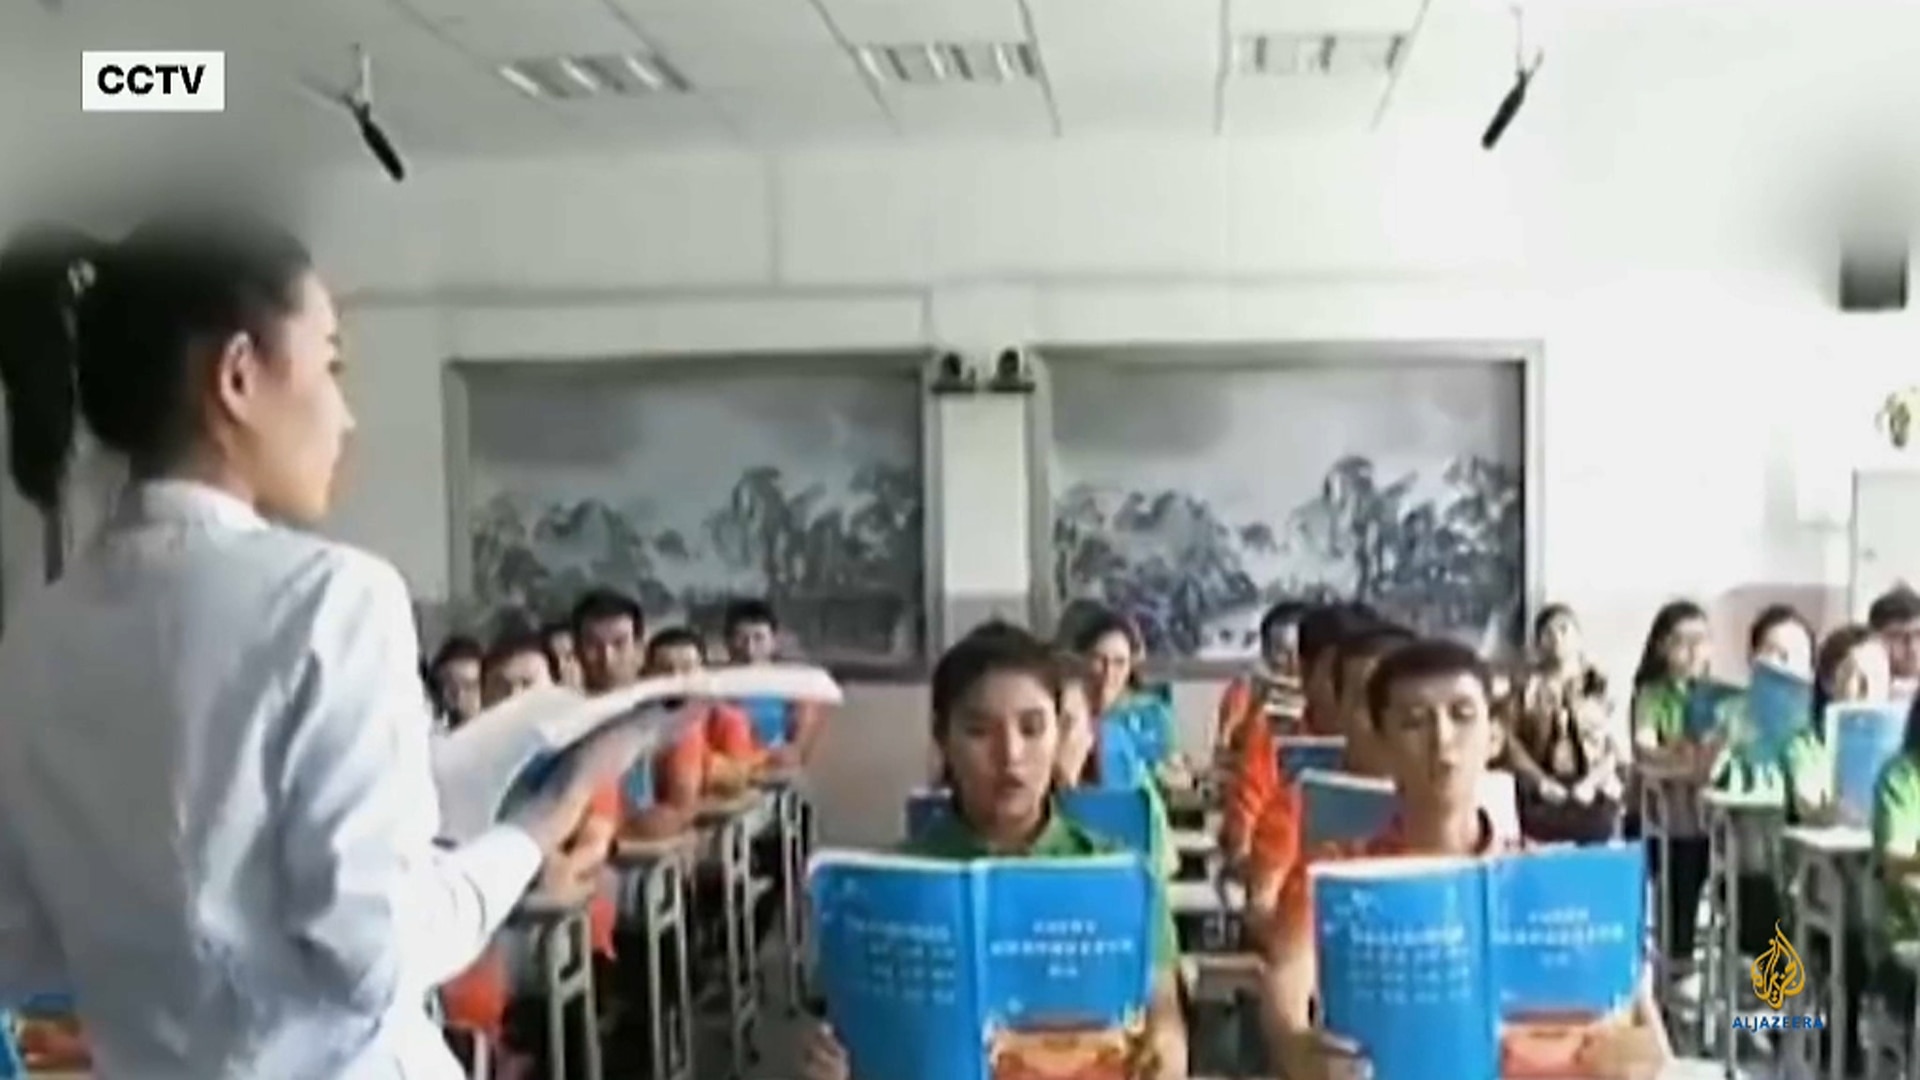 In a rare move, China released images from inside what it calls 'vocational camps' in Xinjiang province.